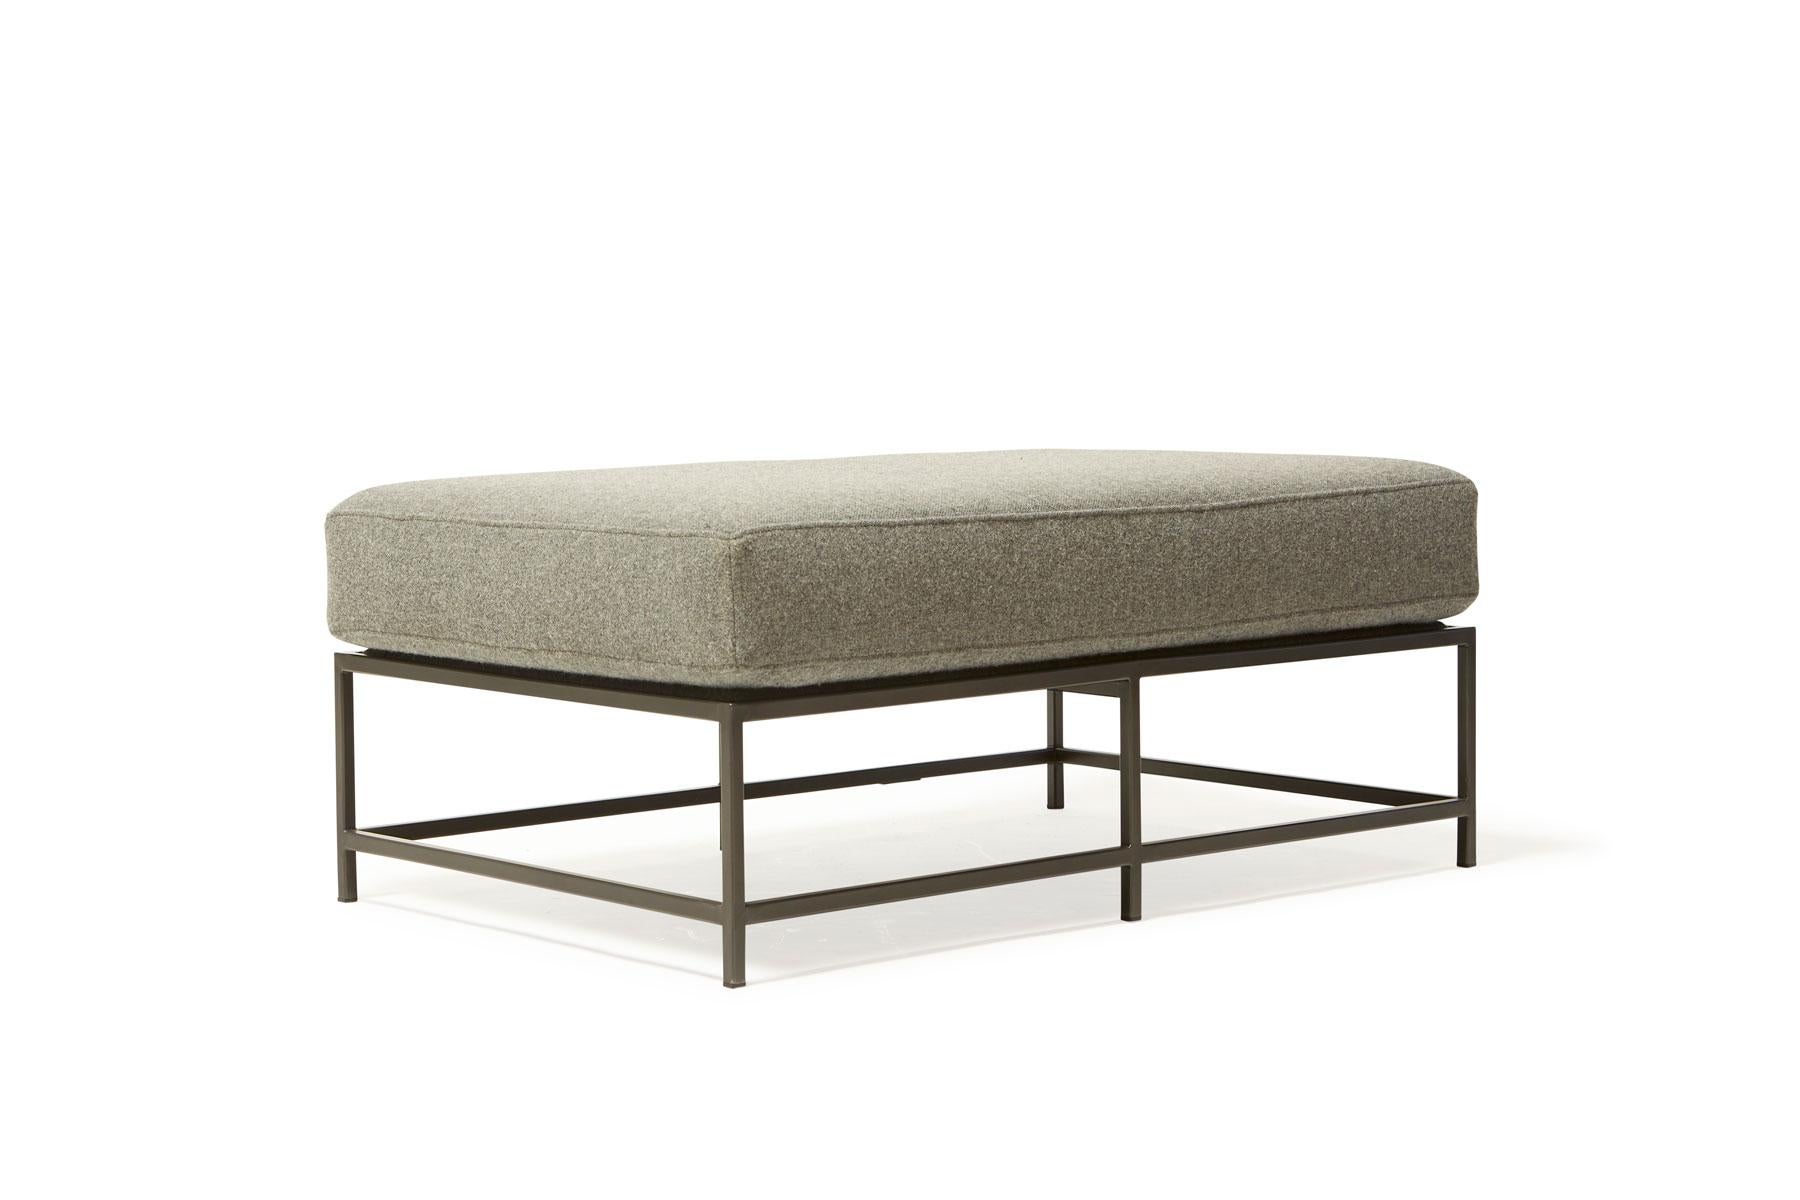 The inheritance bench is a versatile piece that can be used as a chaise extension on any sofa, as an independent seating option or as a large upholstered coffee table.

This variation is upholstered in a grey wool by Faribault Woolen Mill Co. The